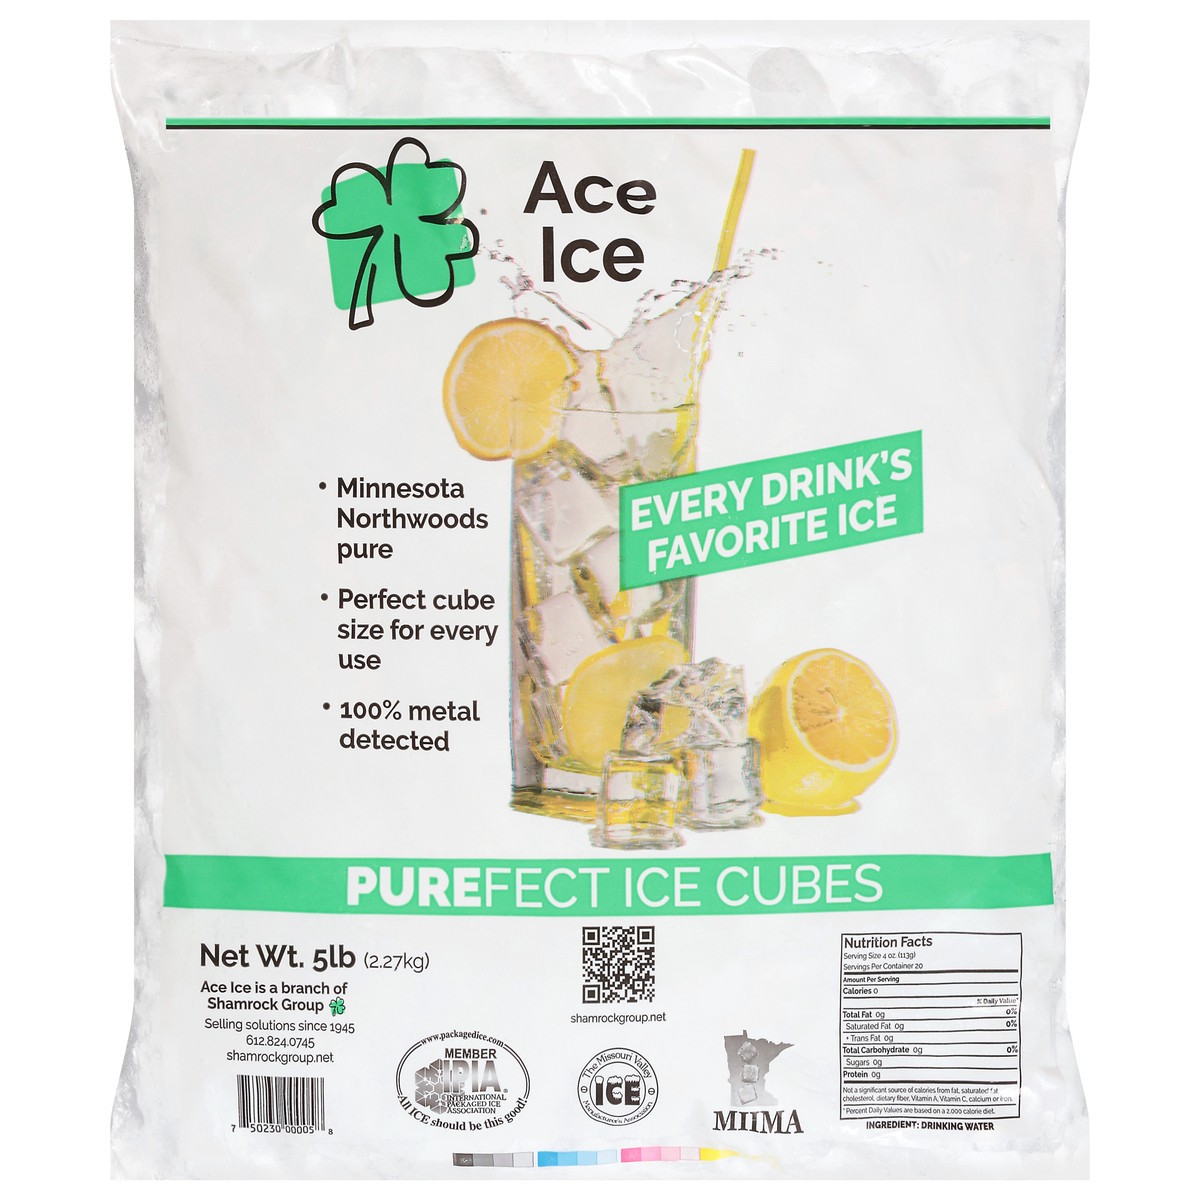 slide 5 of 14, Ace Ice Purefect Ice Cubes 5 lb, 5 lb